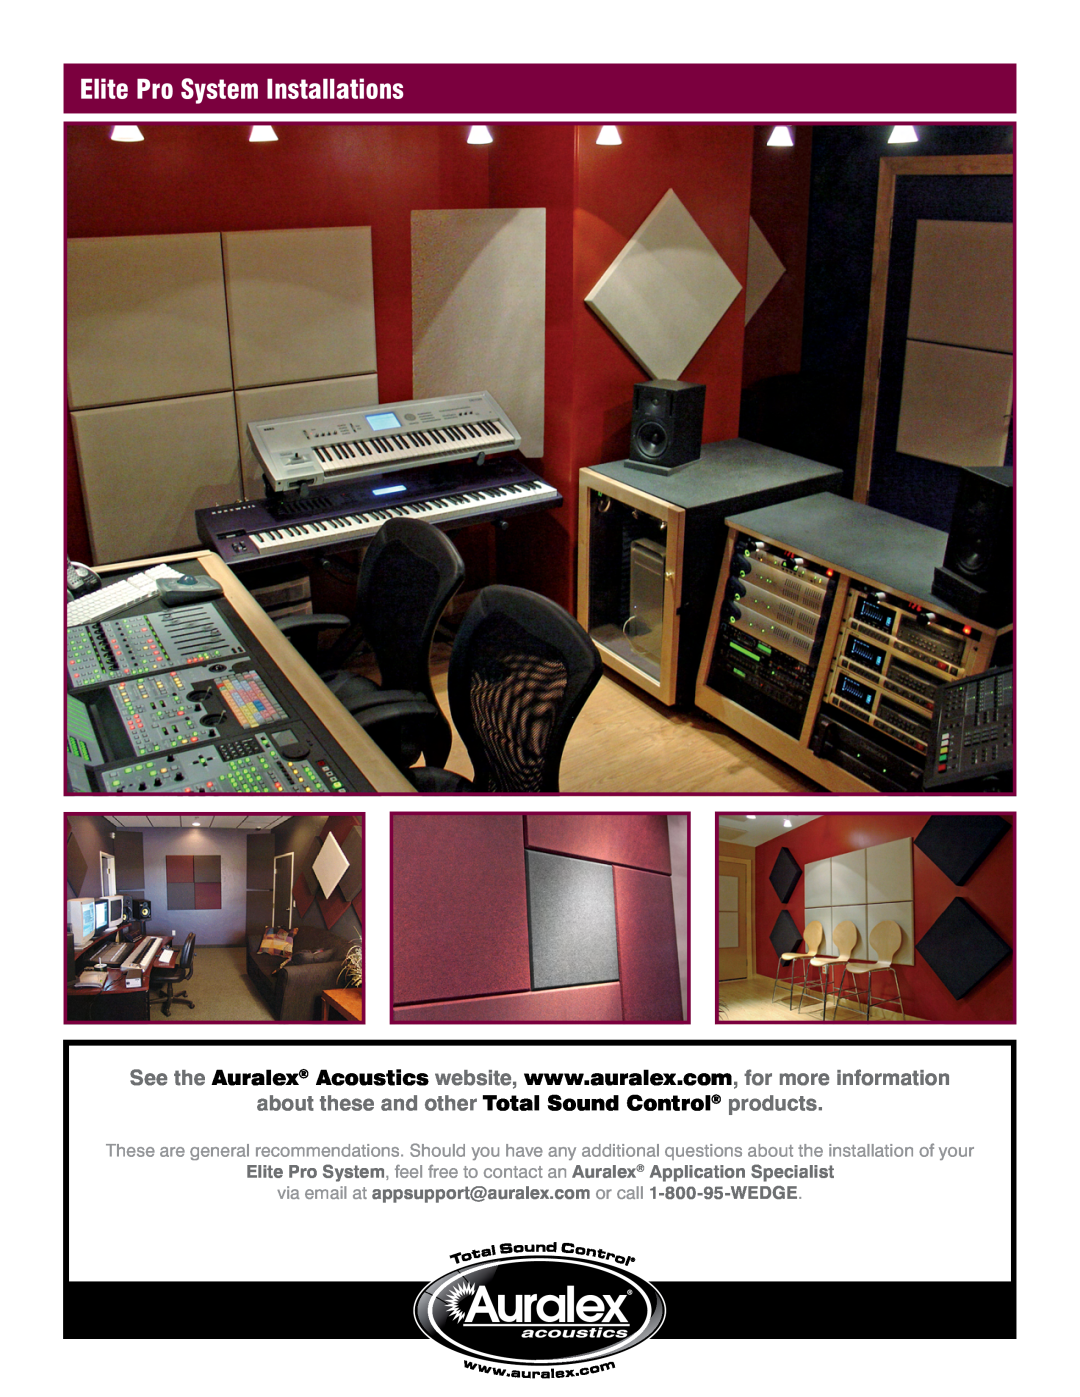 Auralex Acoustics EPS-112T manual Elite Pro System Installations, about these and other Total Sound Control products 